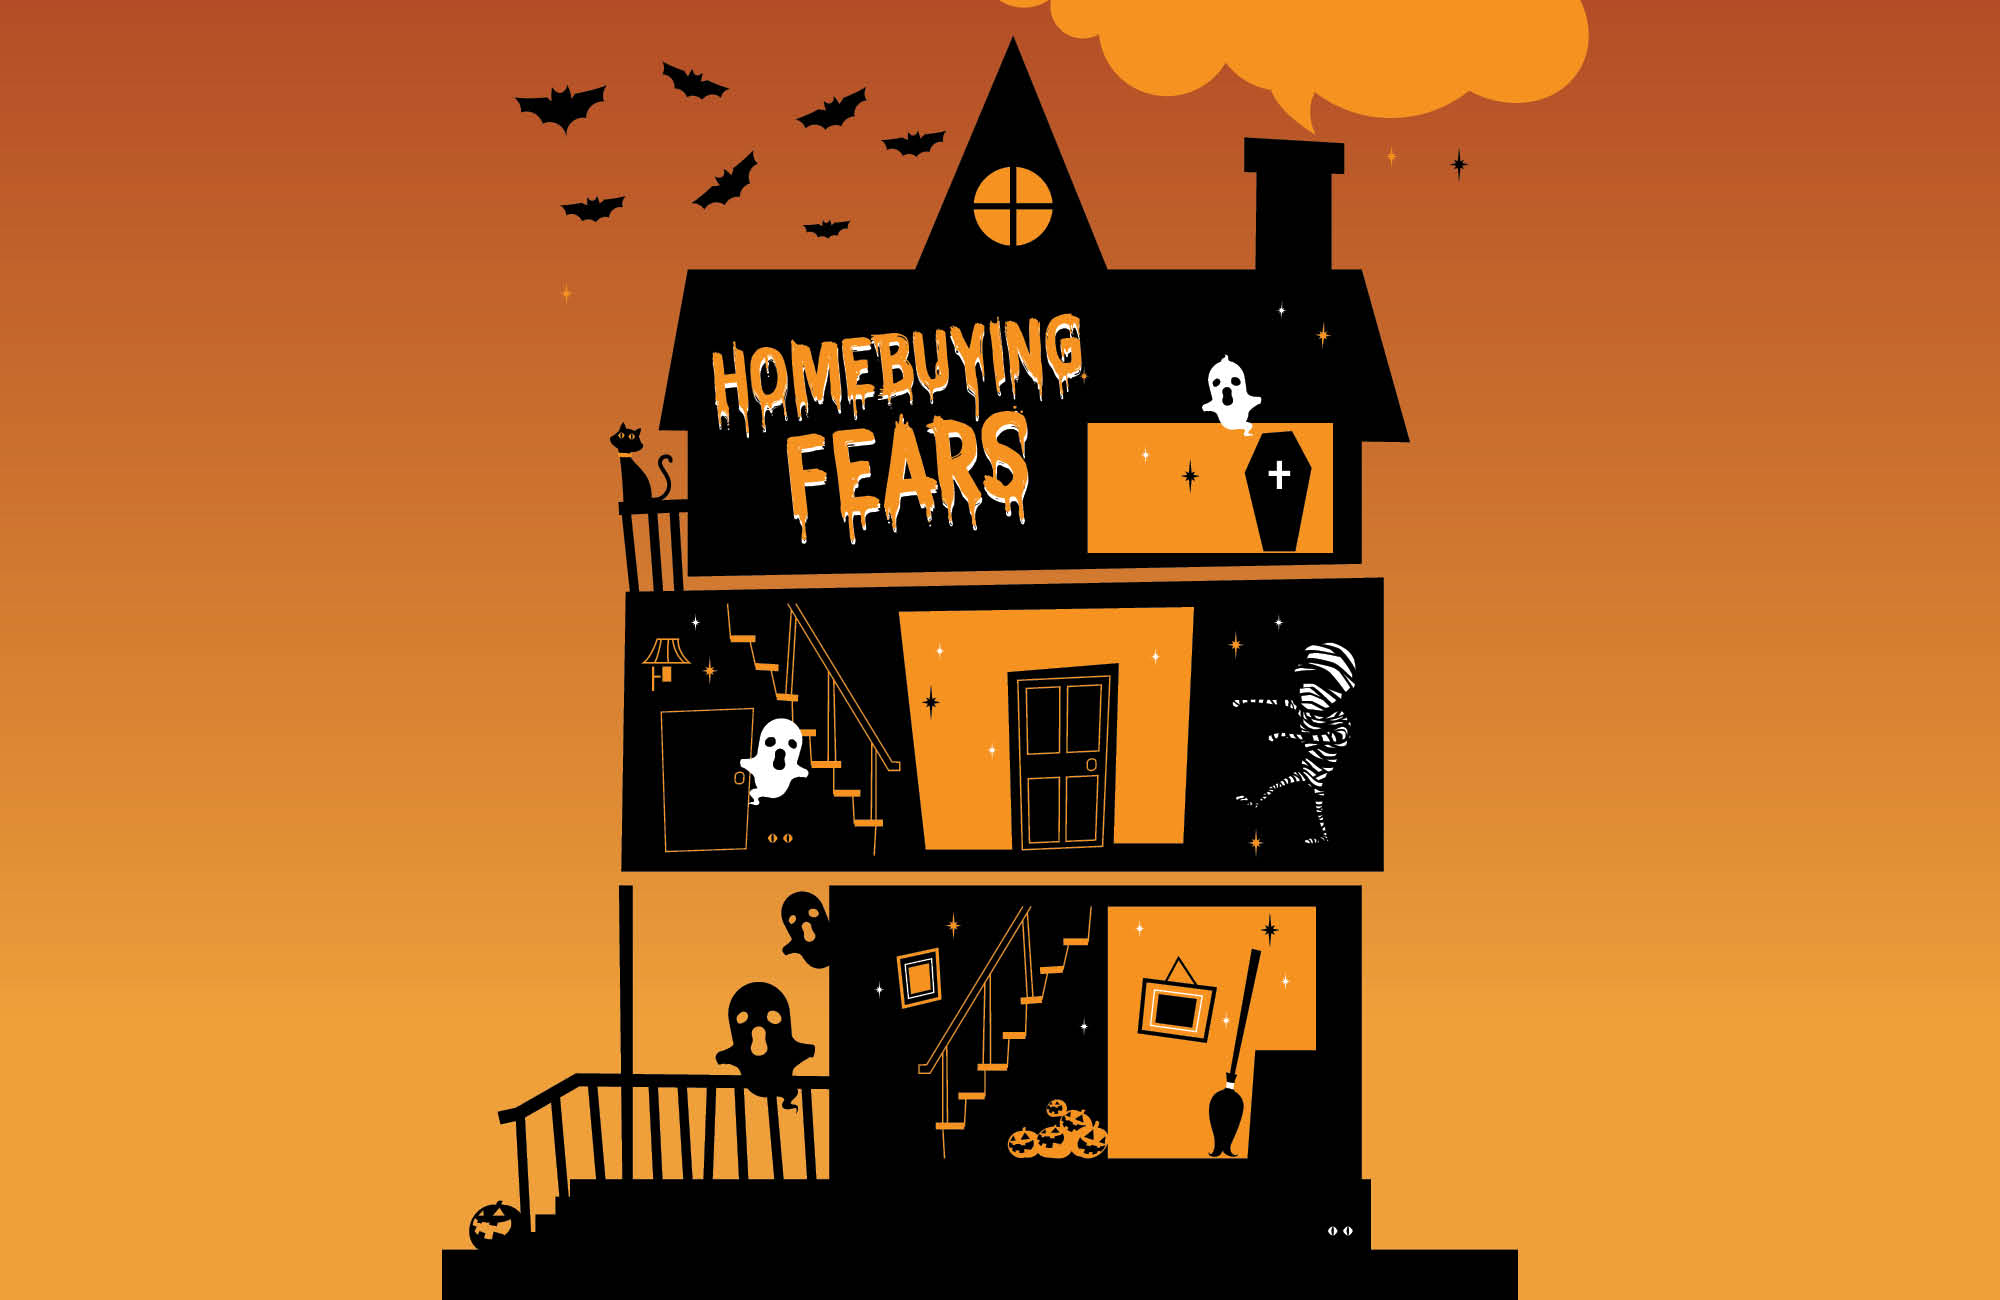 Don't Let These Homebuying Fears Haunt You